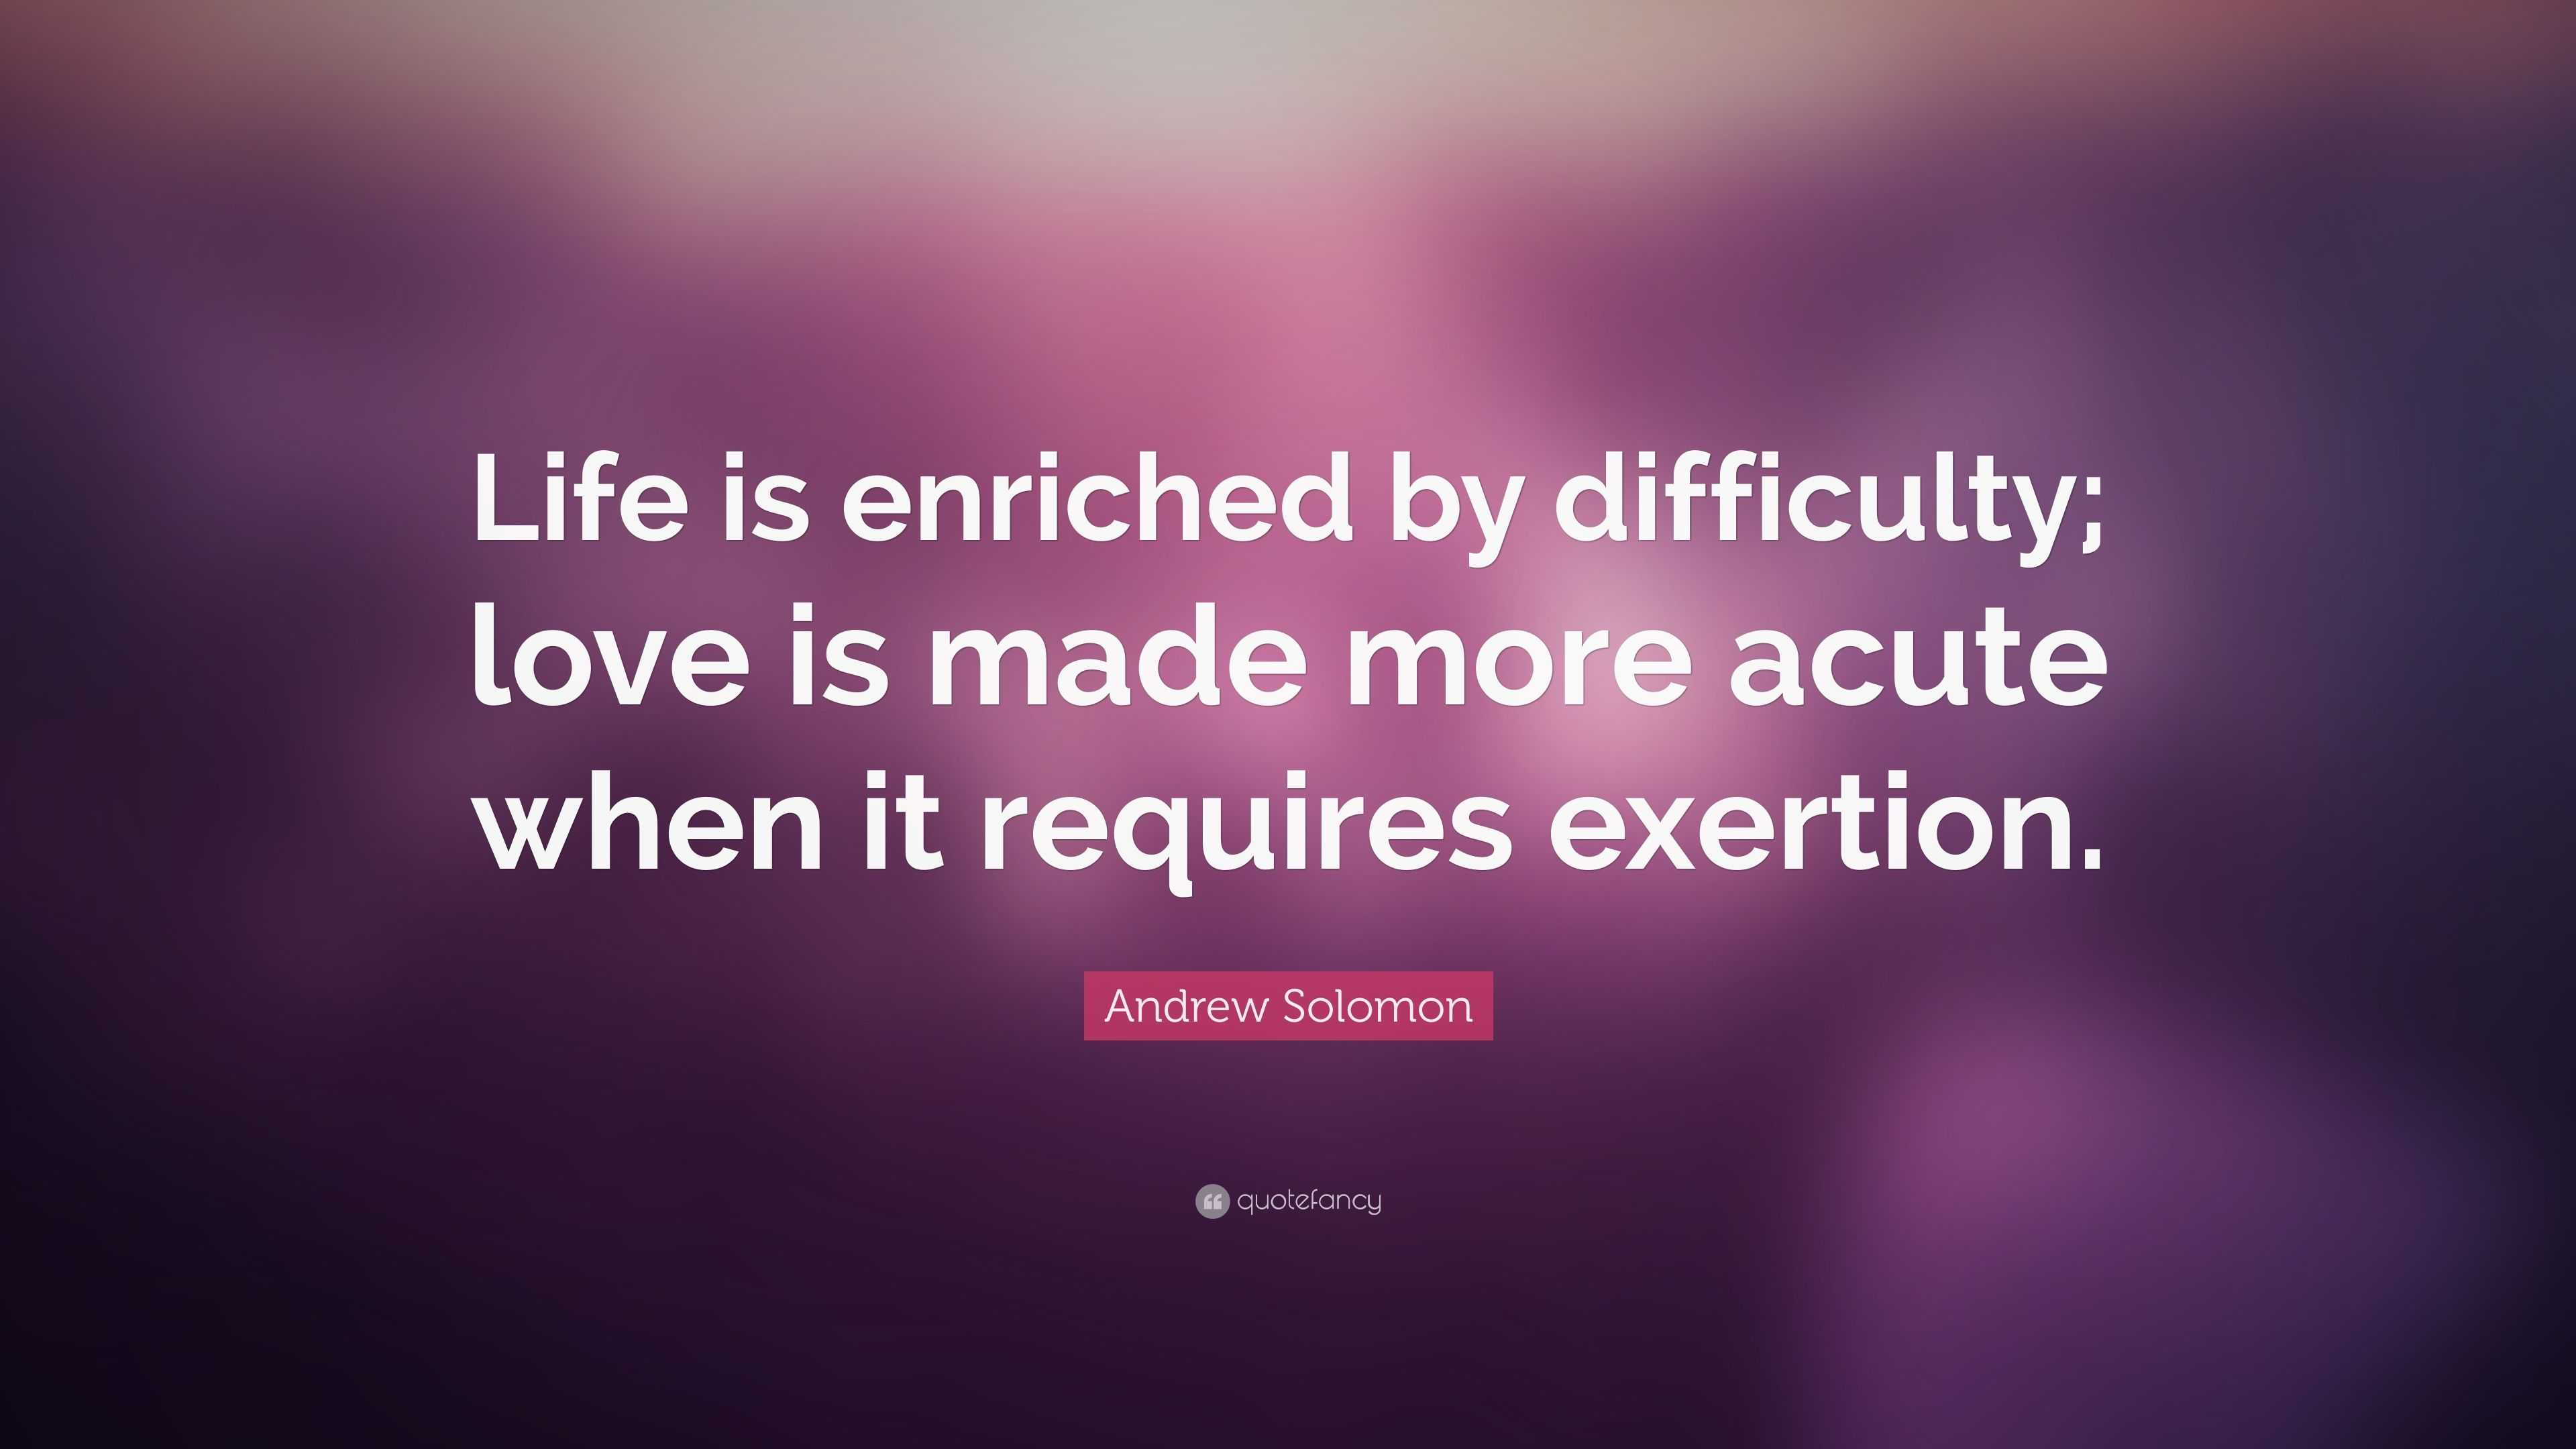 Andrew Solomon Quote: “Life is enriched by difficulty; love is made ...